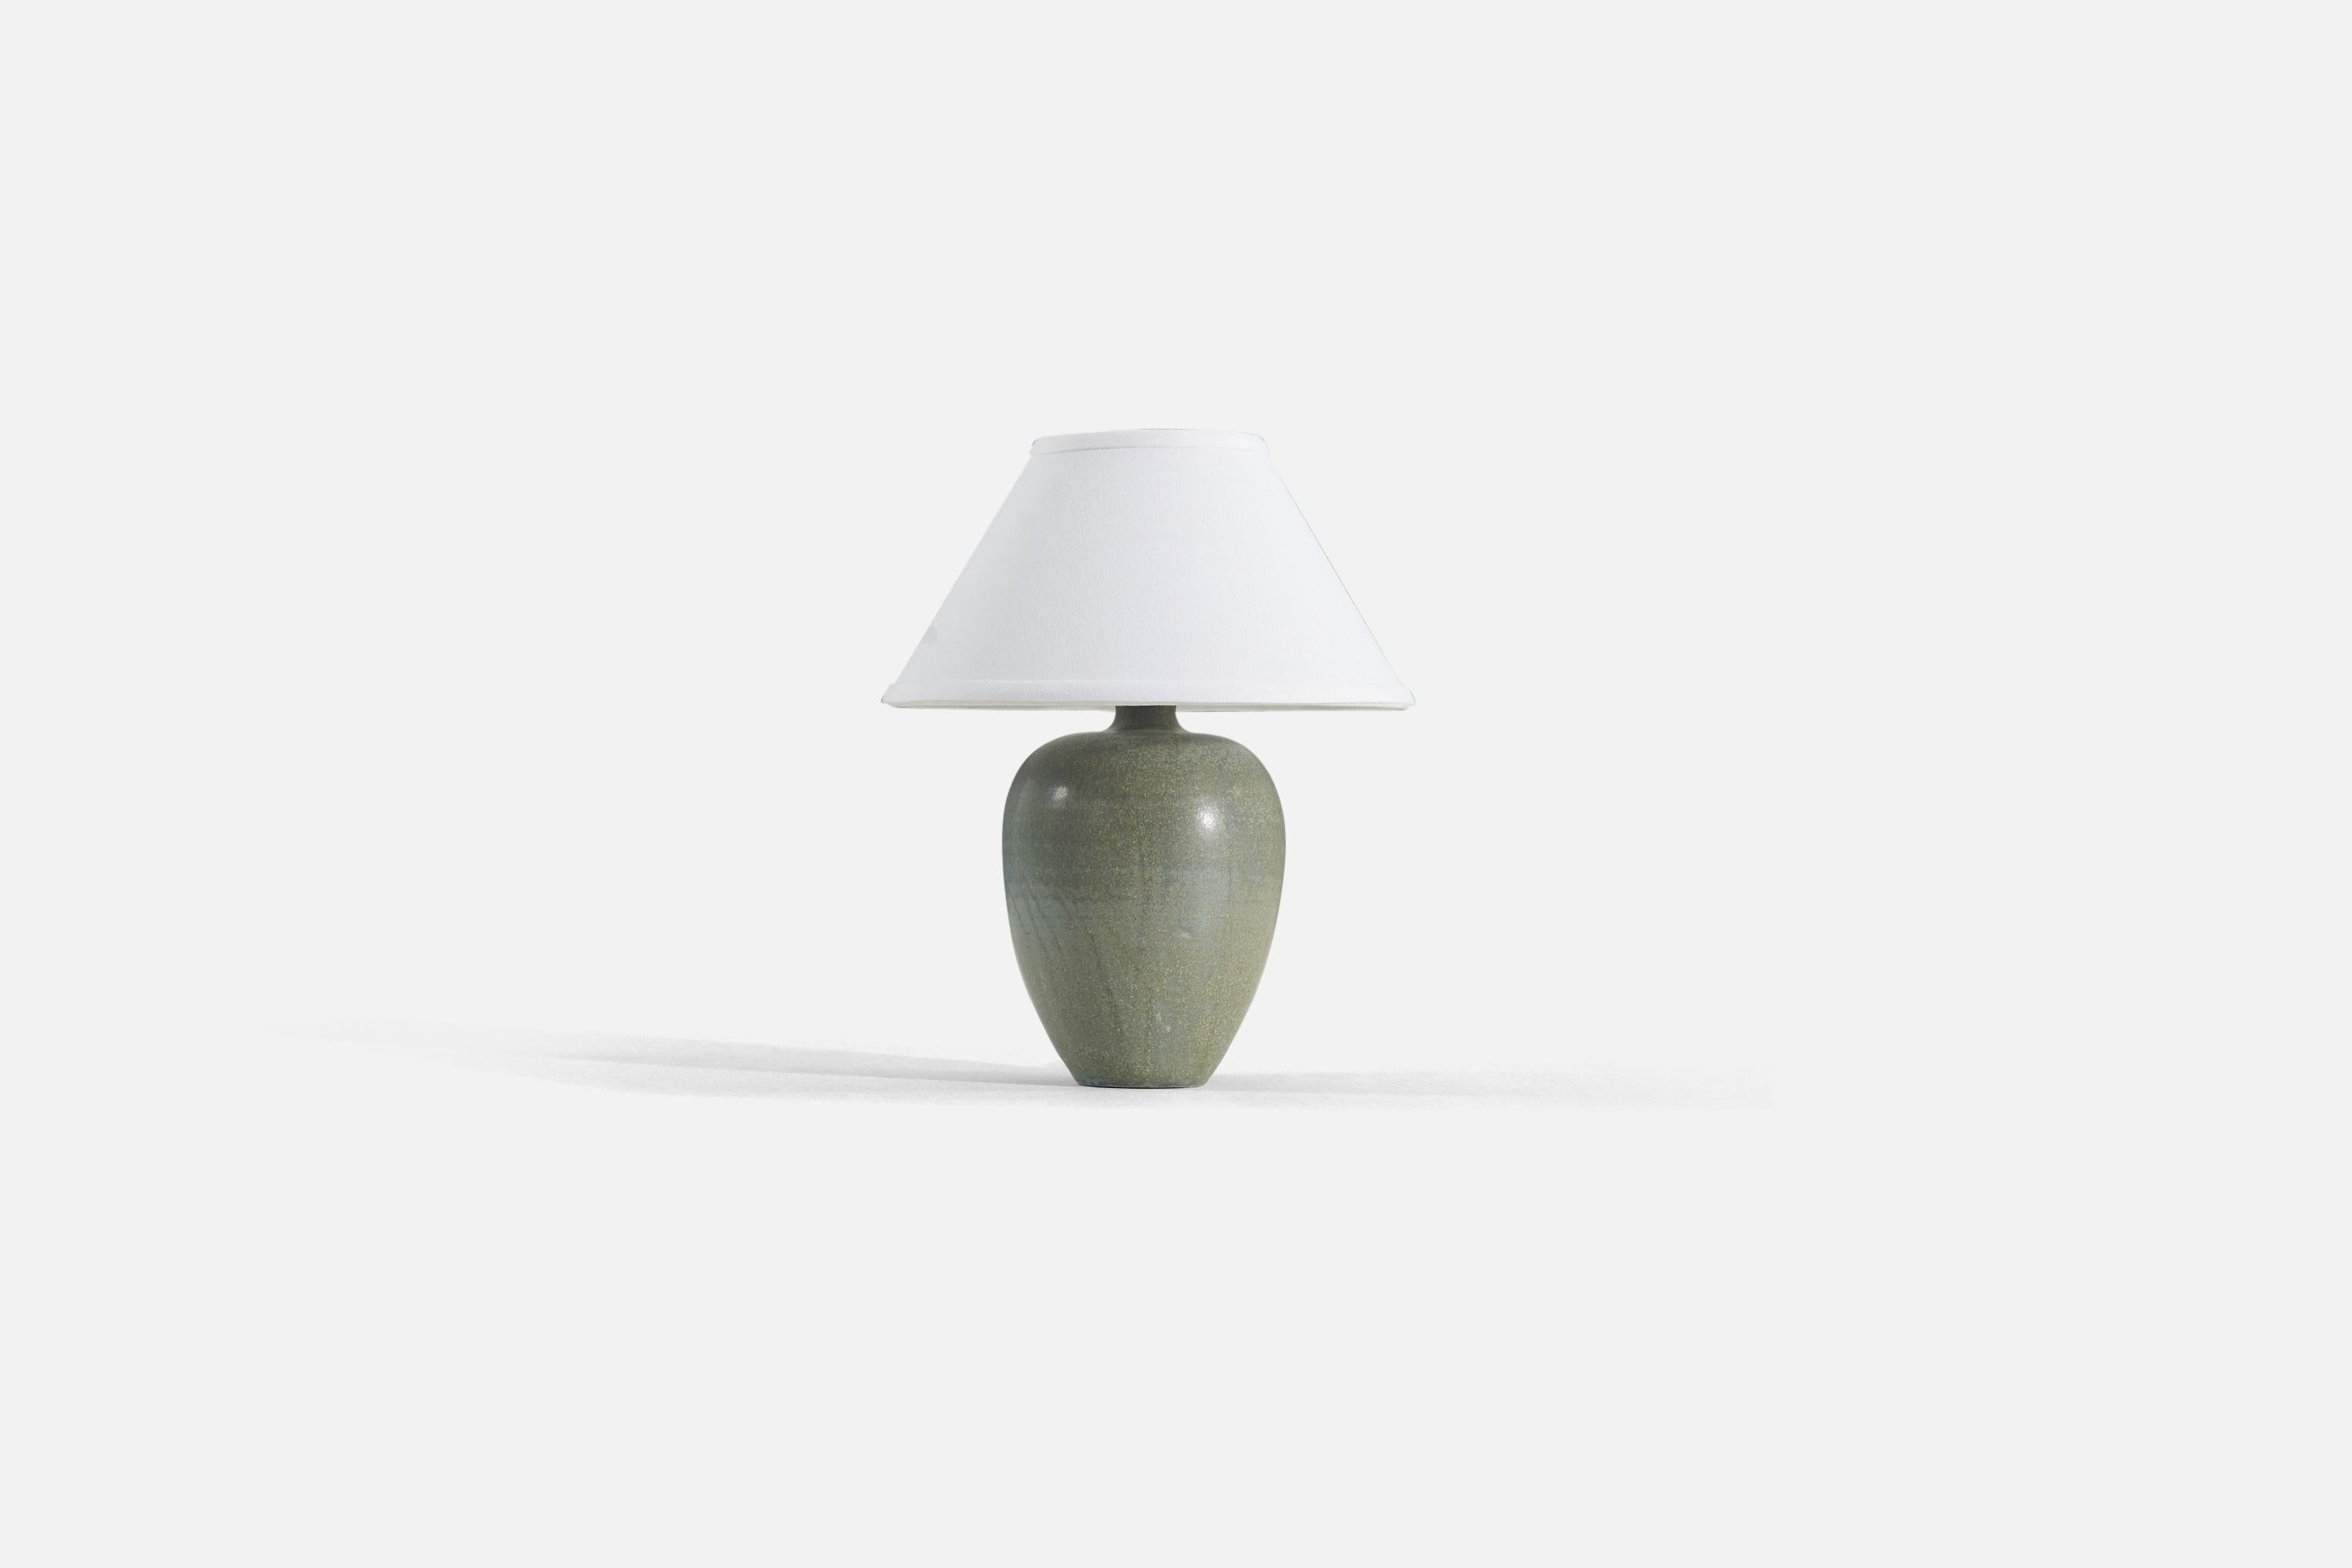 A green-glazed stoneware table lamp designed by Erich & Ingrid Triller, produced in their own studio Tobo, Sweden, c. 1950s.

Sold without lampshade. 

Measurements listed are of lamp only. 
Shade : 4.5 x 10.25 x 6
Lamp with shade : 12.5 x